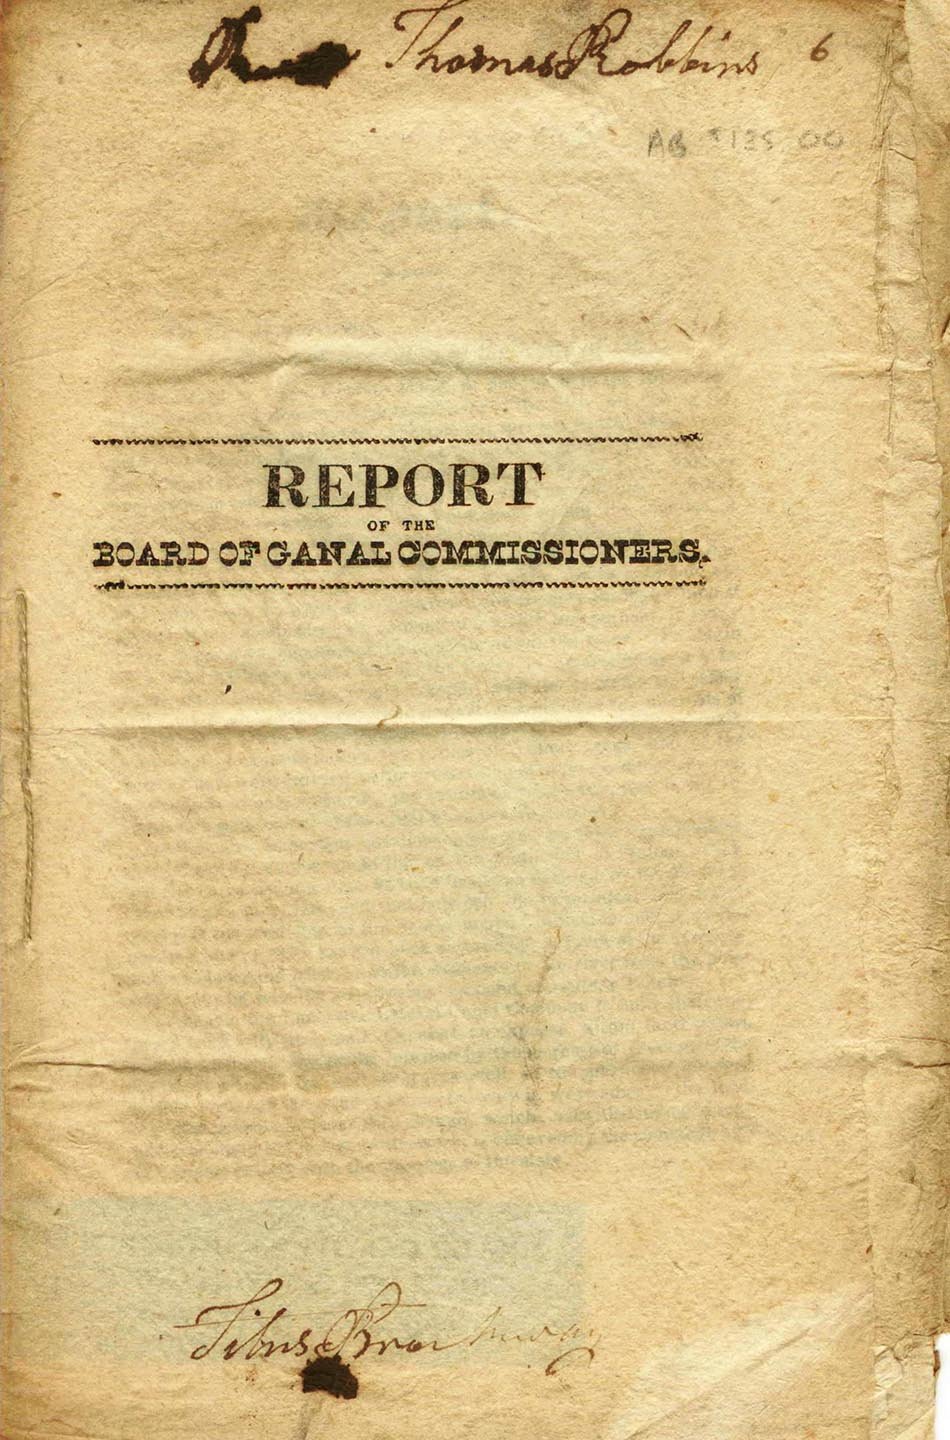 Report of the Board of Canal Commissioners